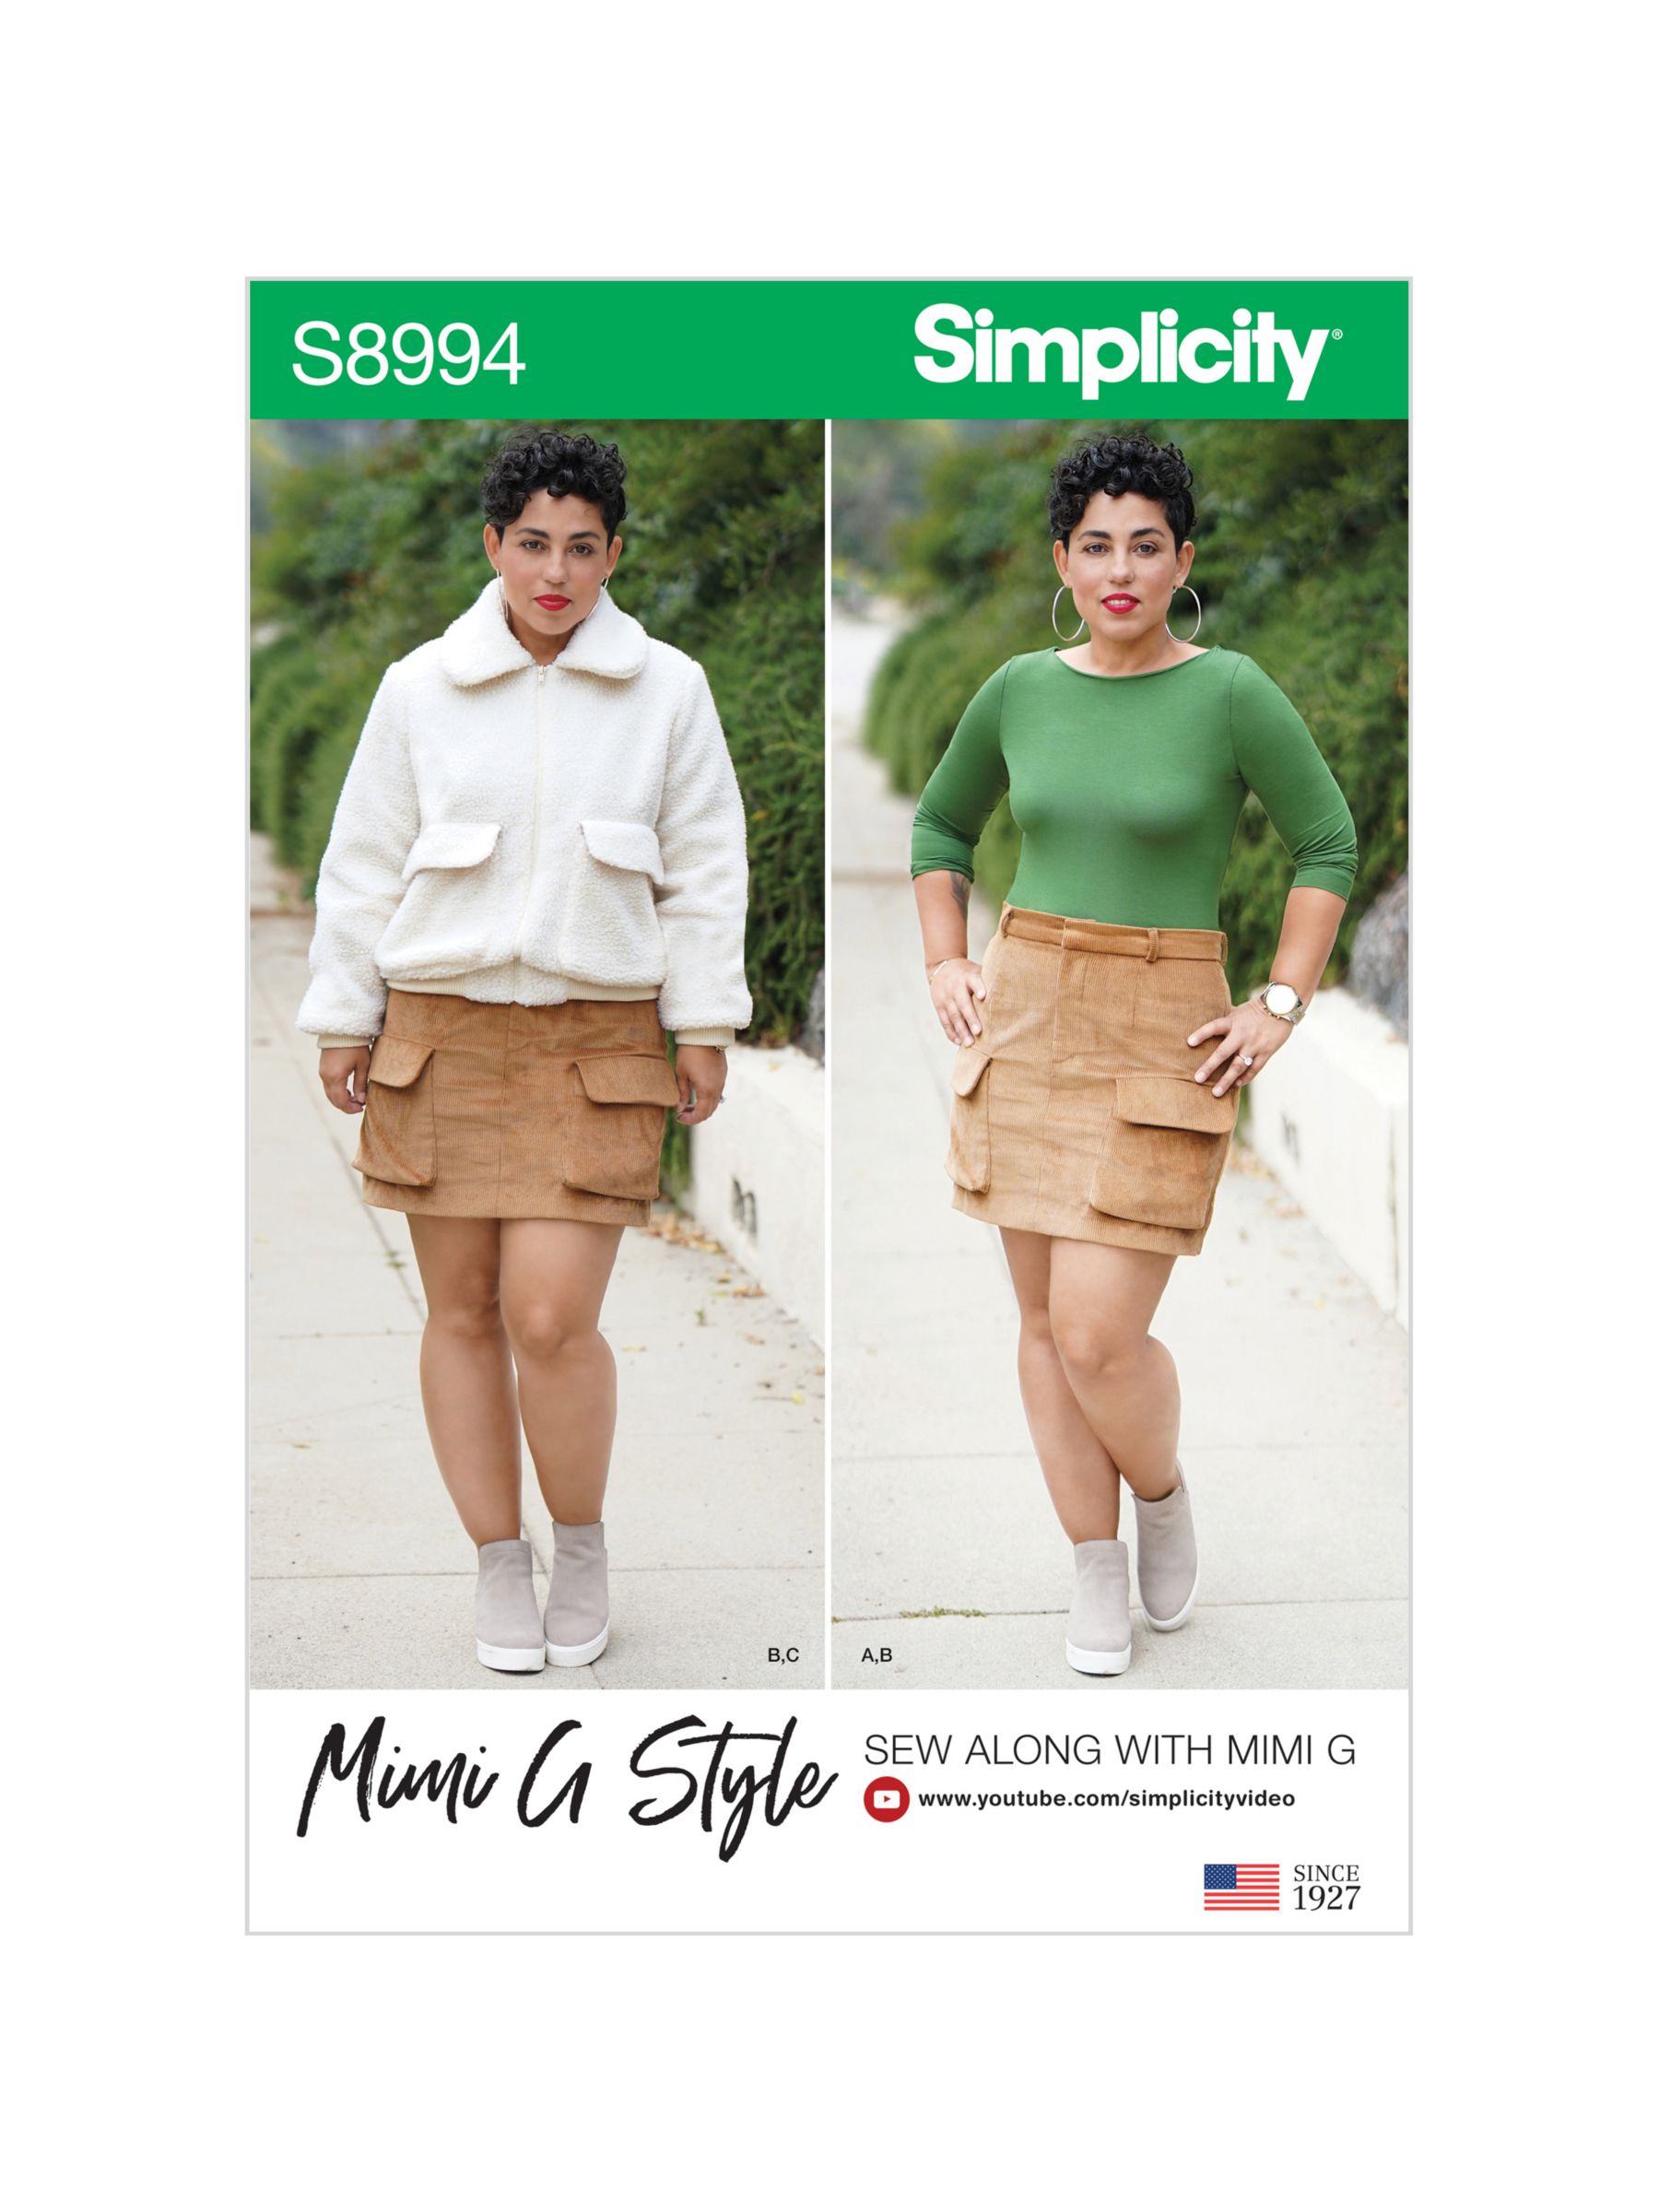 Simplicity Mimi G Style Women S Jacket Skirt And Top Sewing Pattern